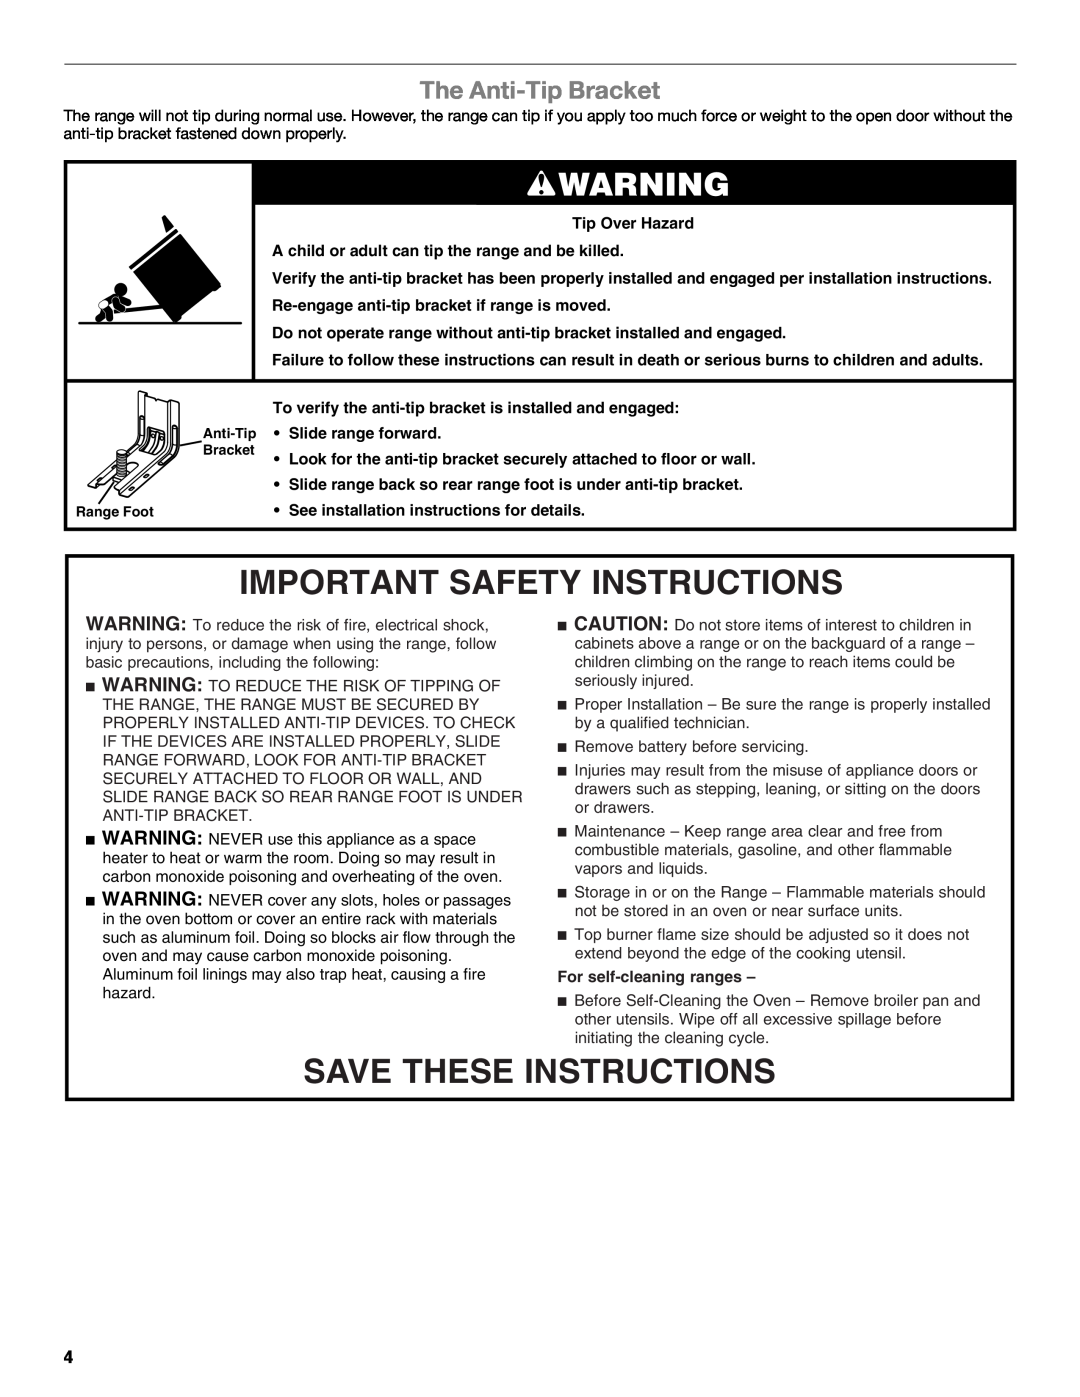 Amana W10531343A manual The Anti-Tip Bracket, Important Safety Instructions, Save These Instructions, Slide range forward 